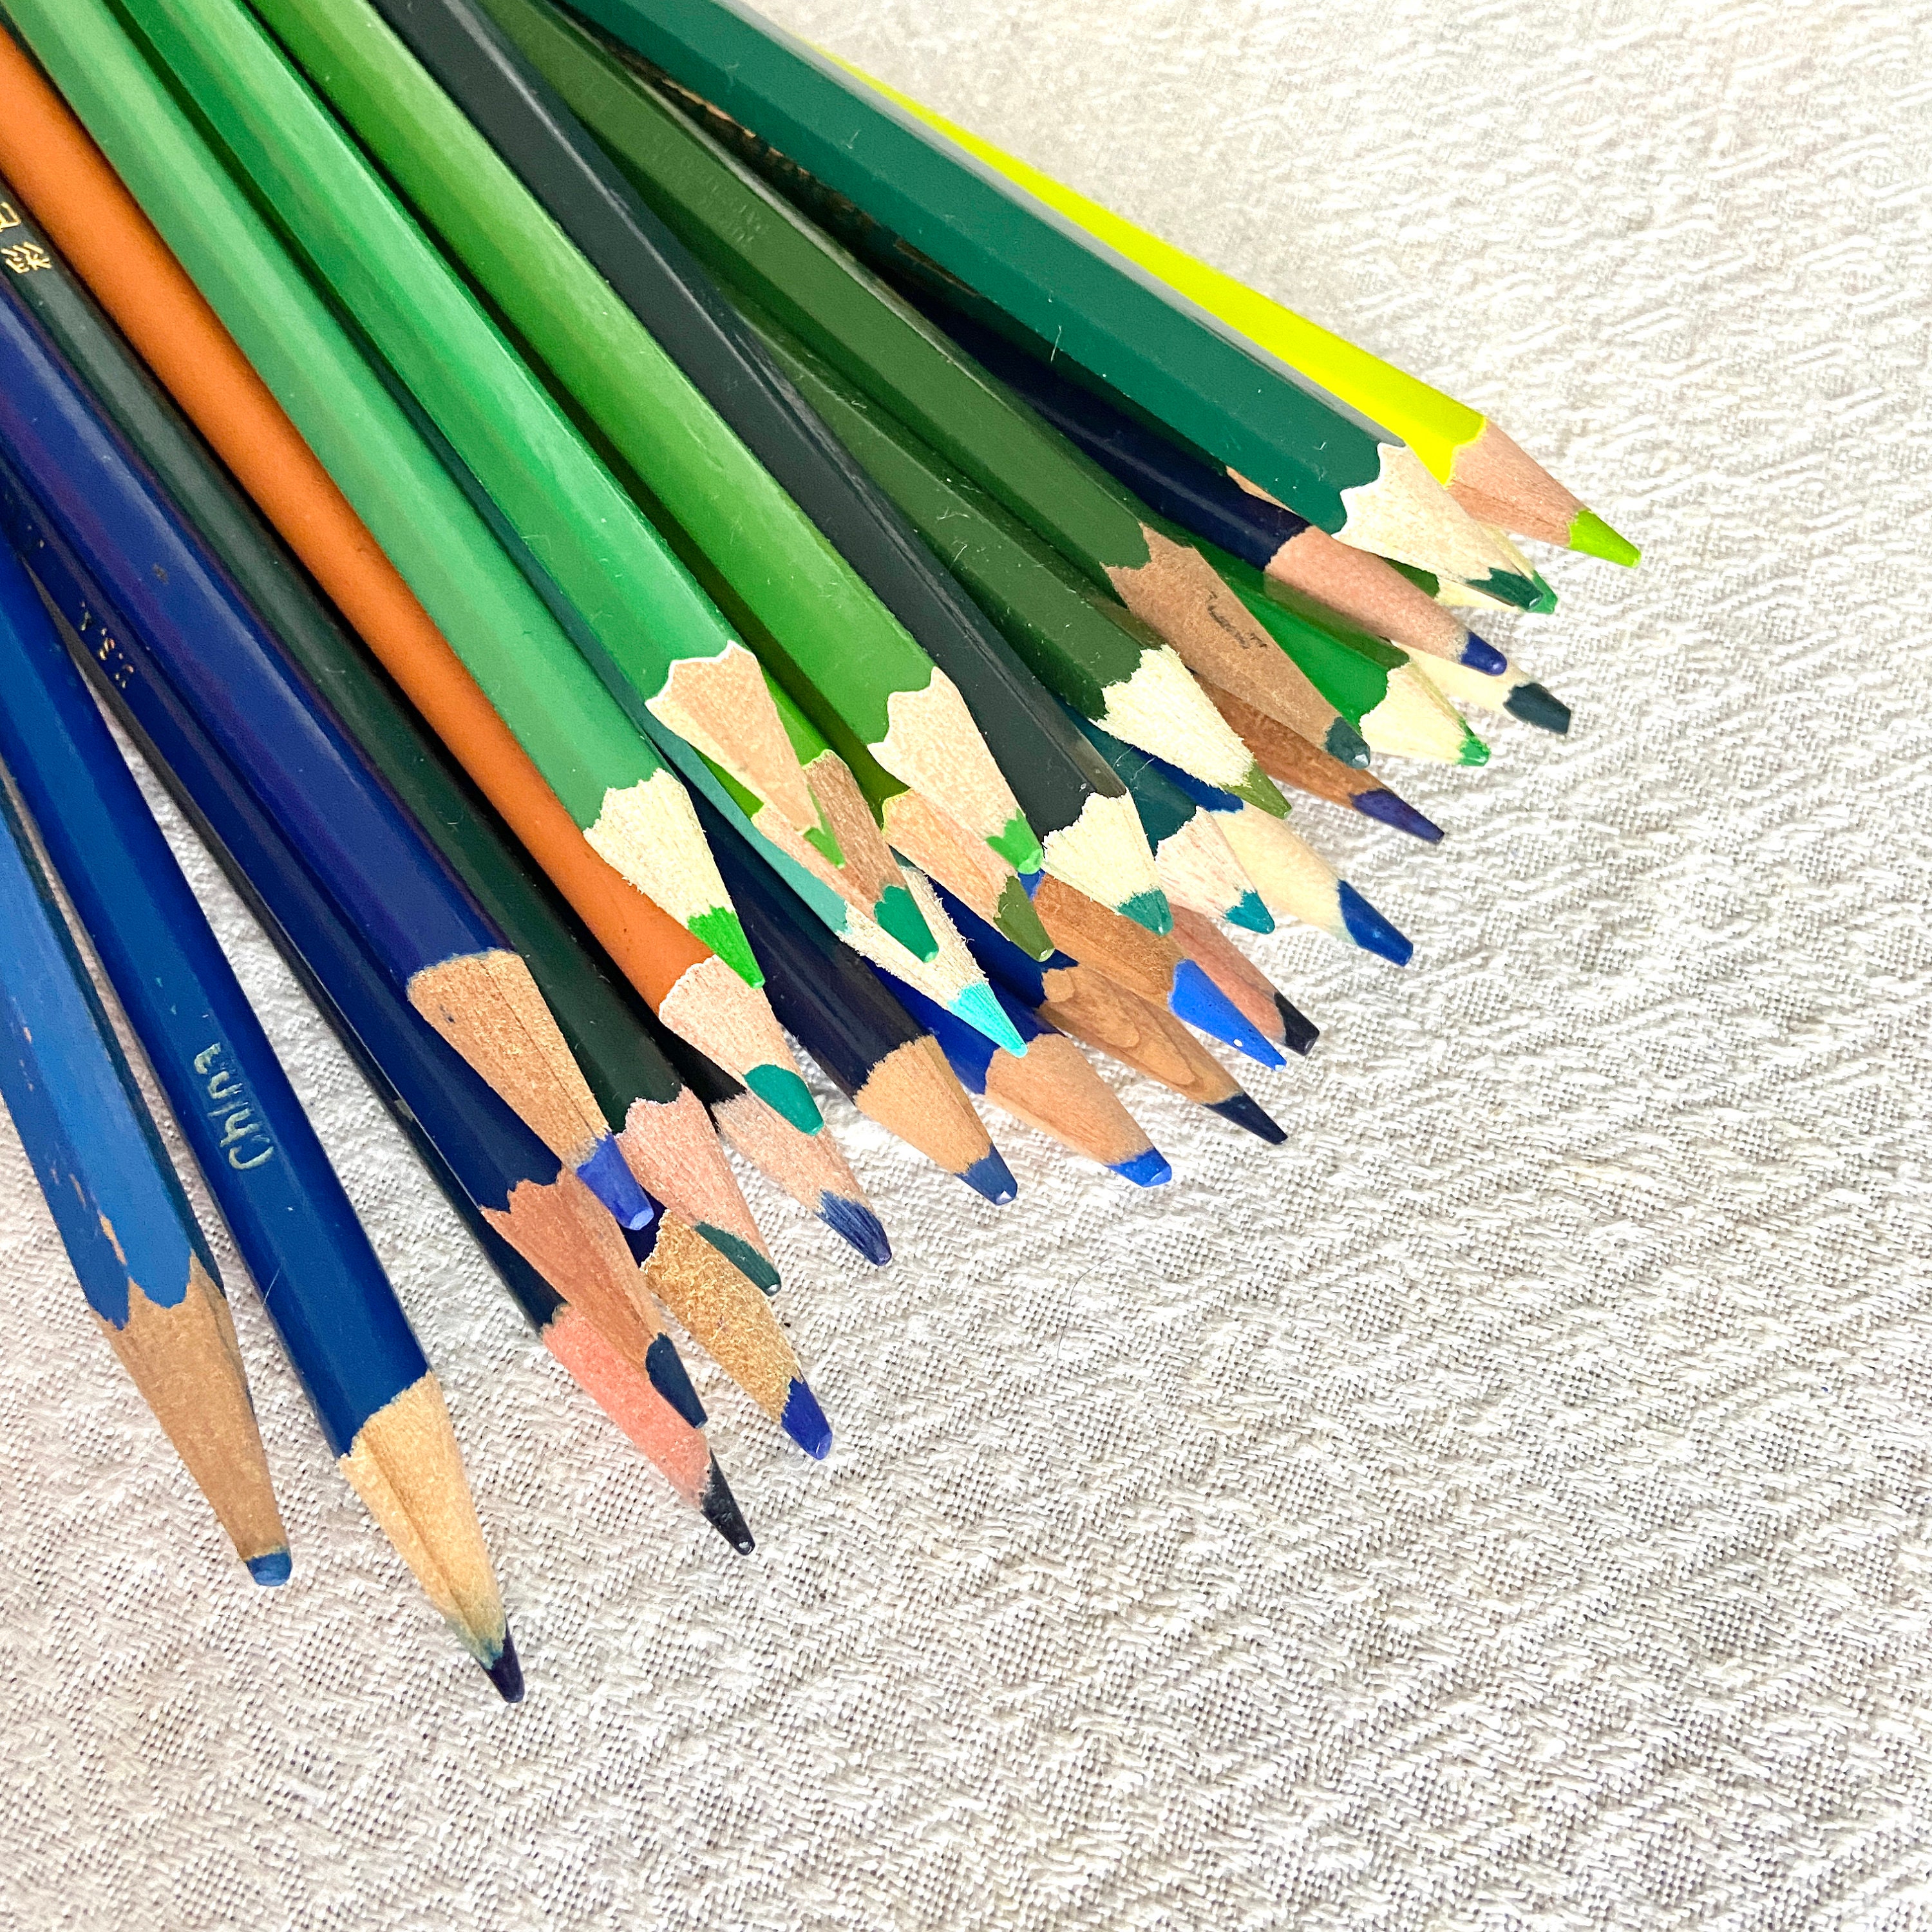 36 Blue and Green Colored Pencils Presharpened, Some Used Unused